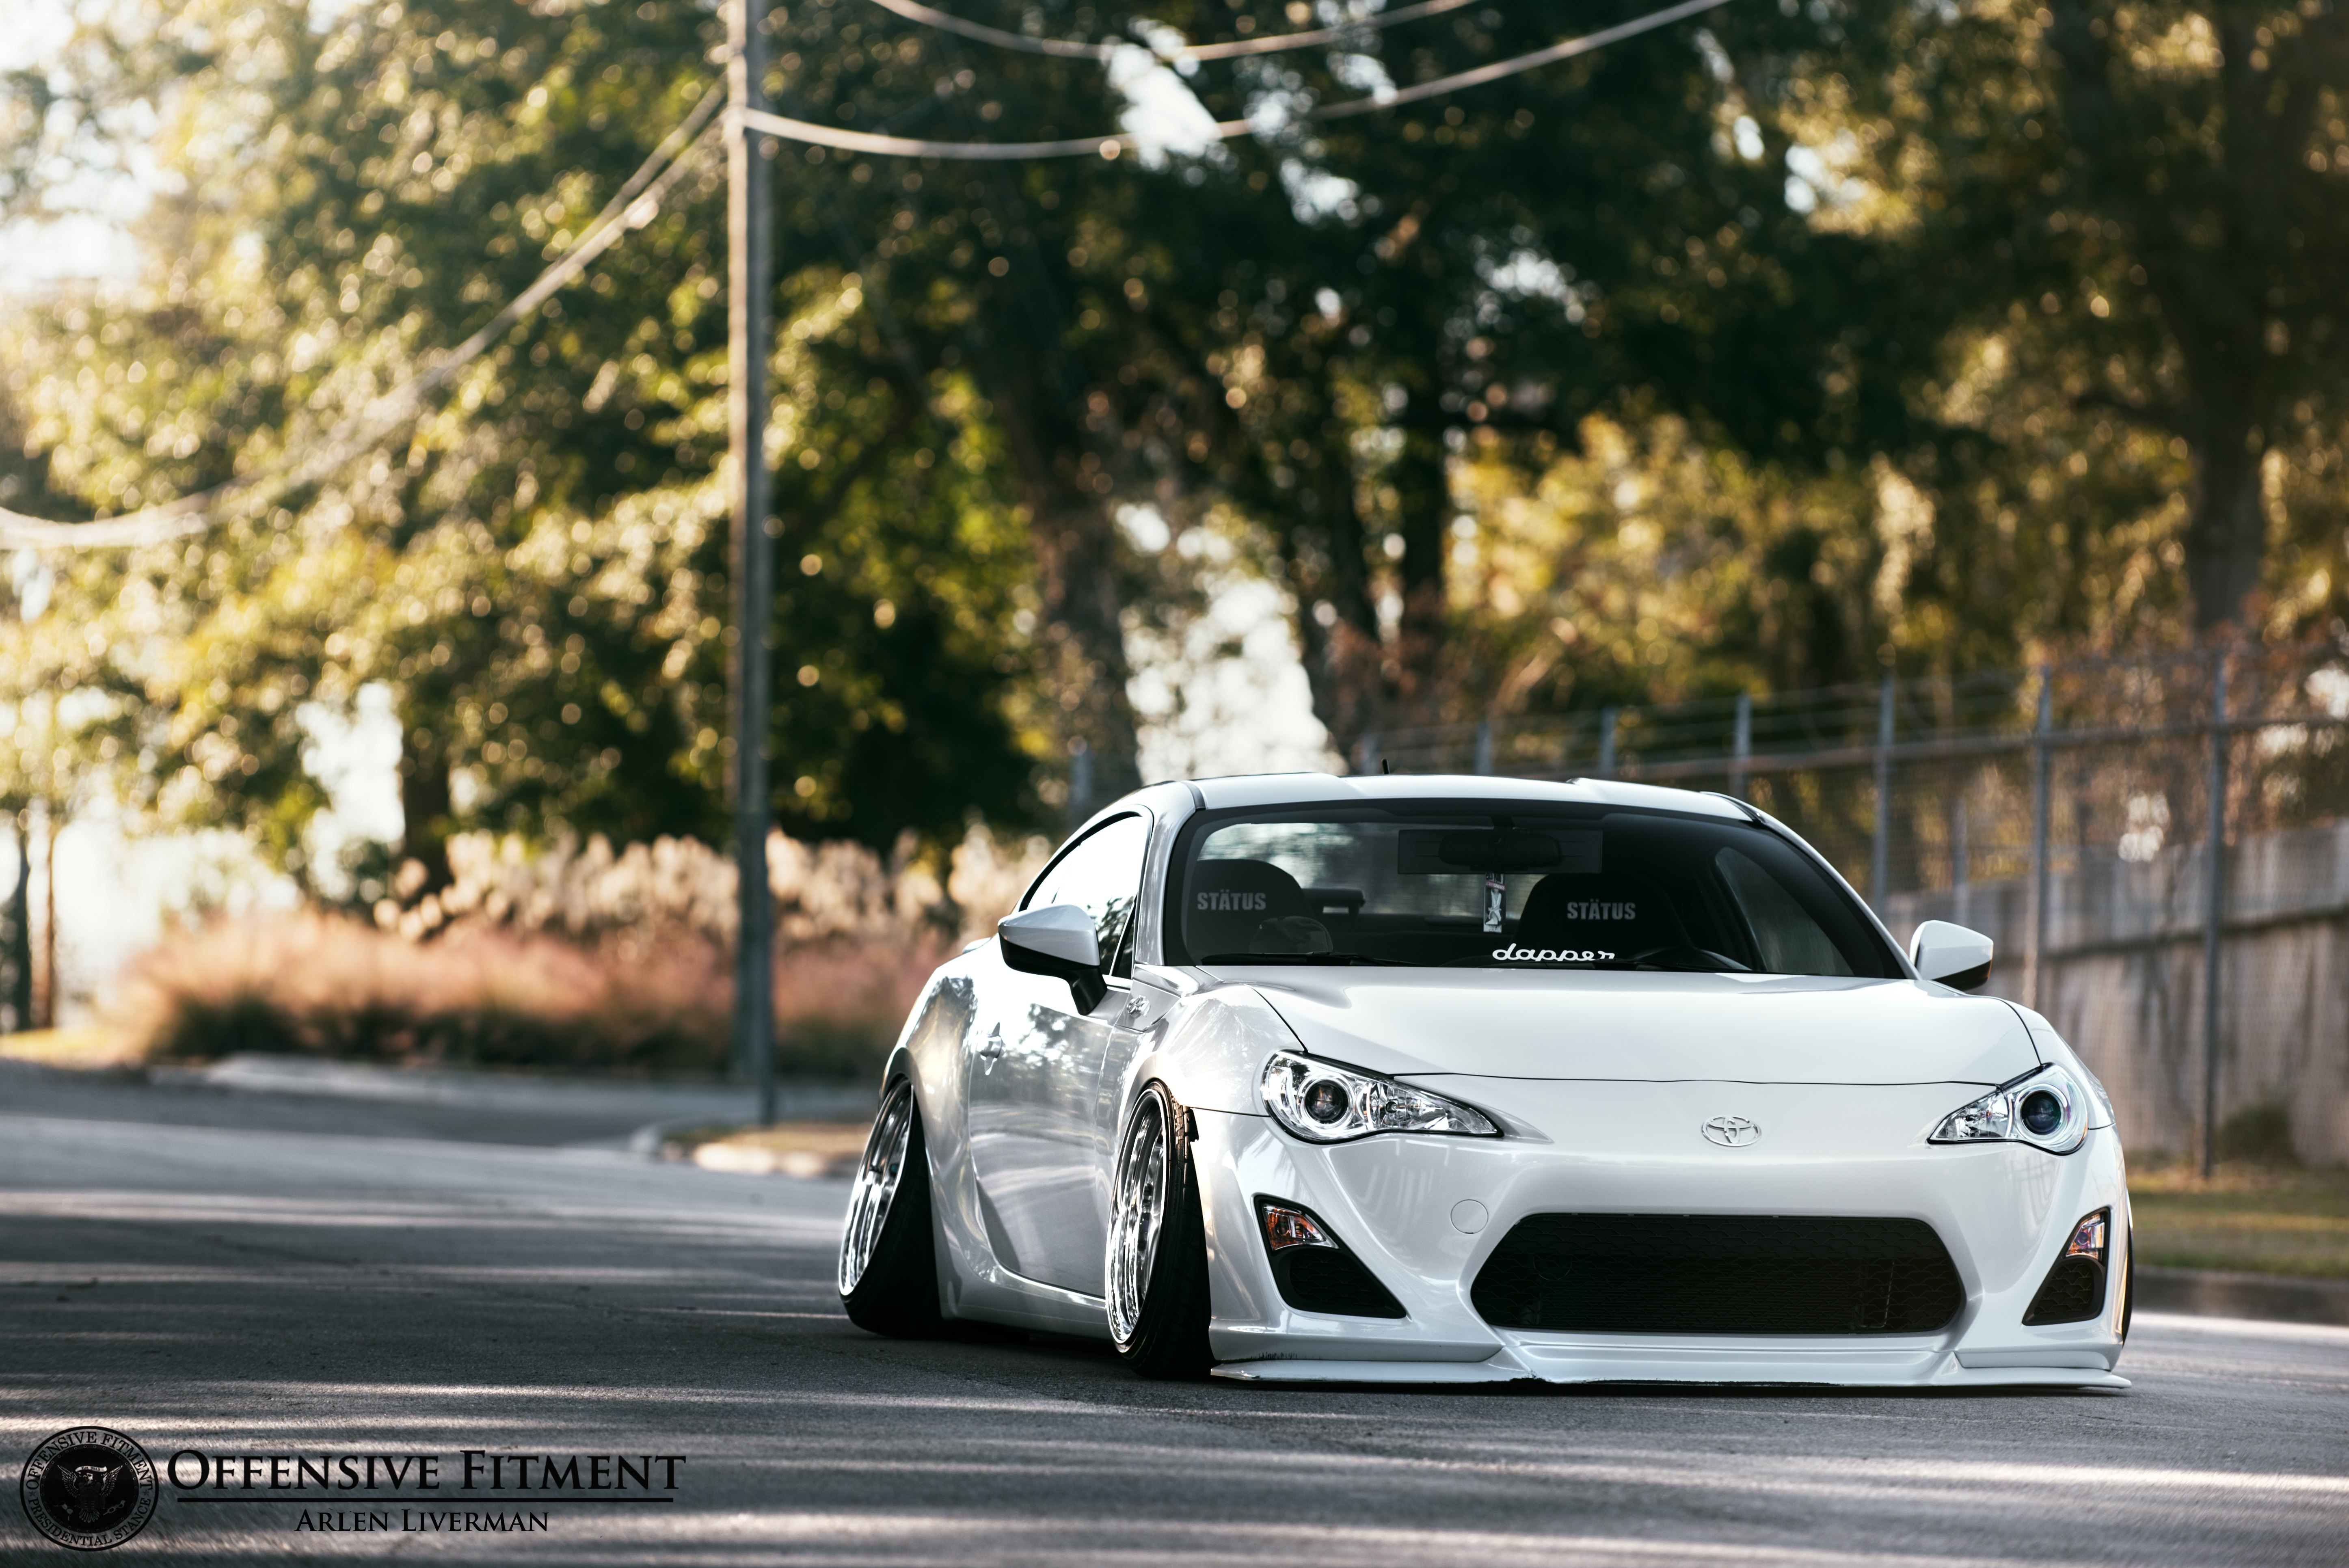 White Stanced Toyota 86 Taken to Another Level with Custom Parts